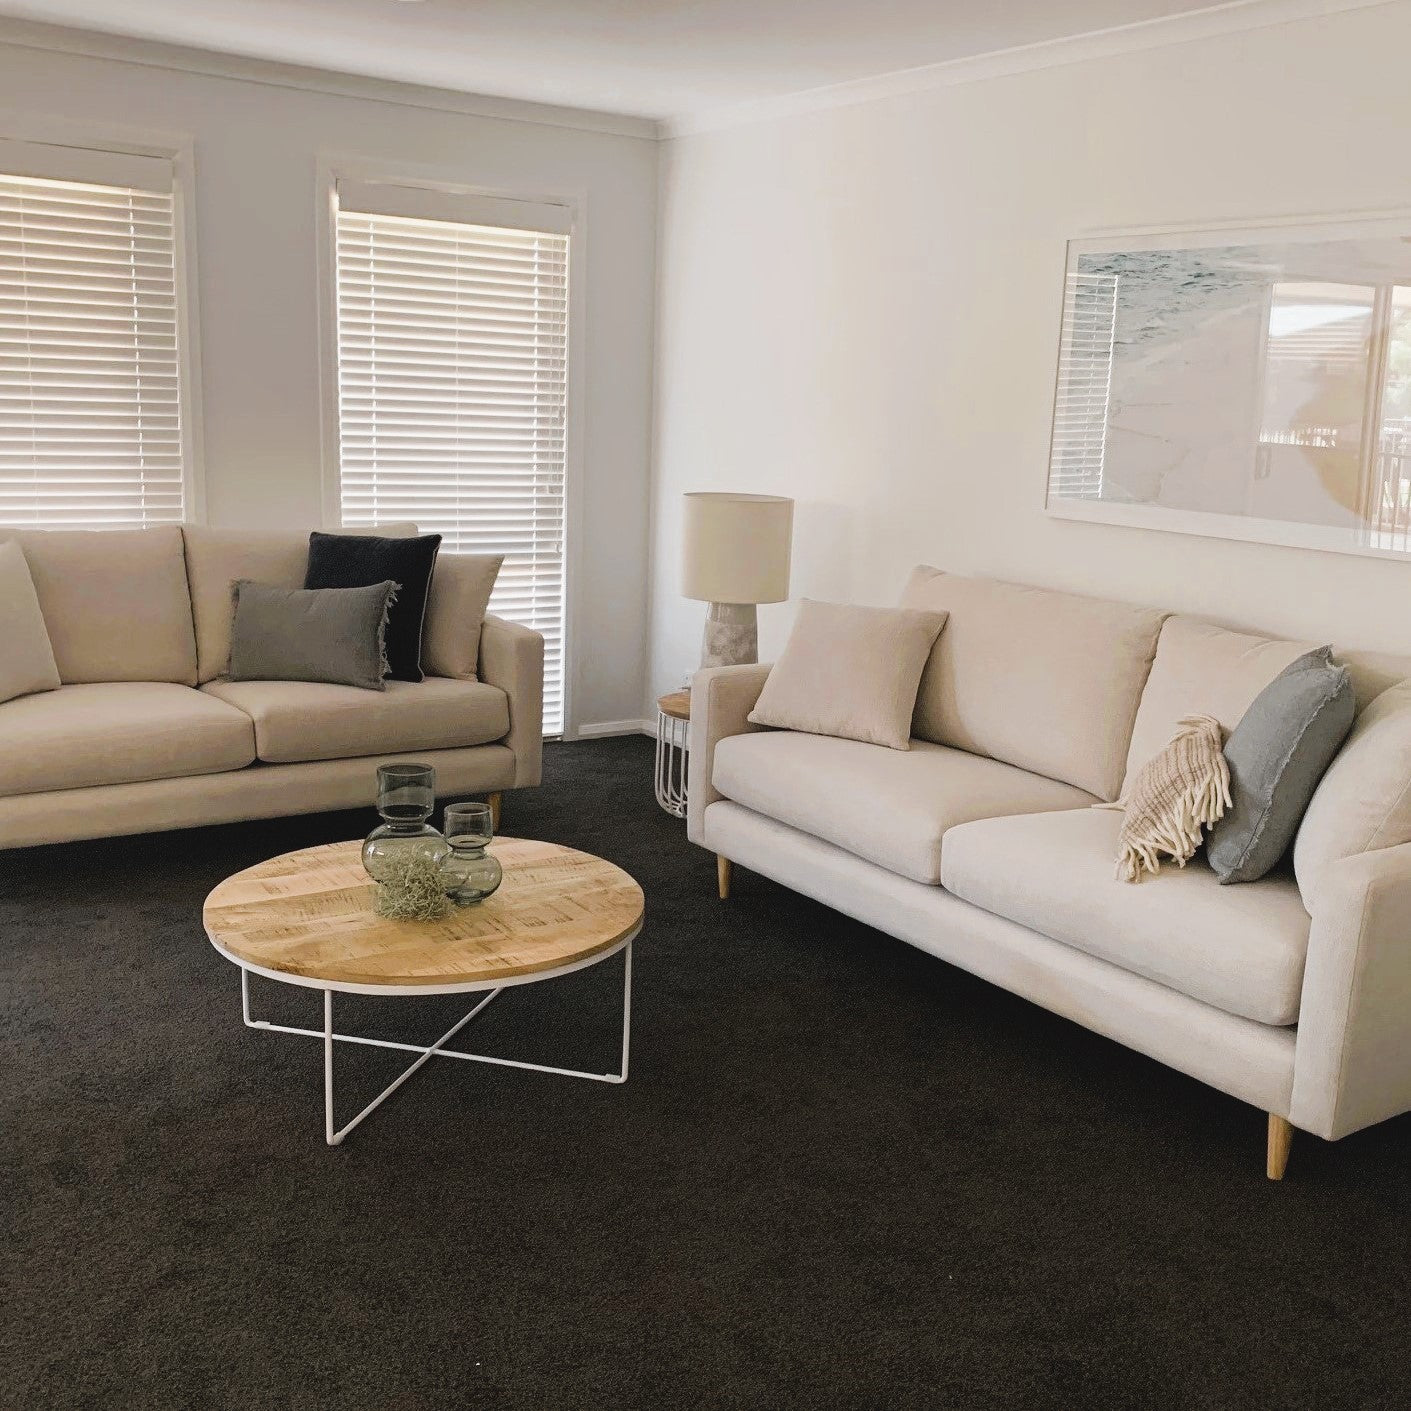 Ally Sofa by Molmic available from Make Your House A Home, Furniture Store located in Bendigo, Victoria. Australian Made in Melbourne.